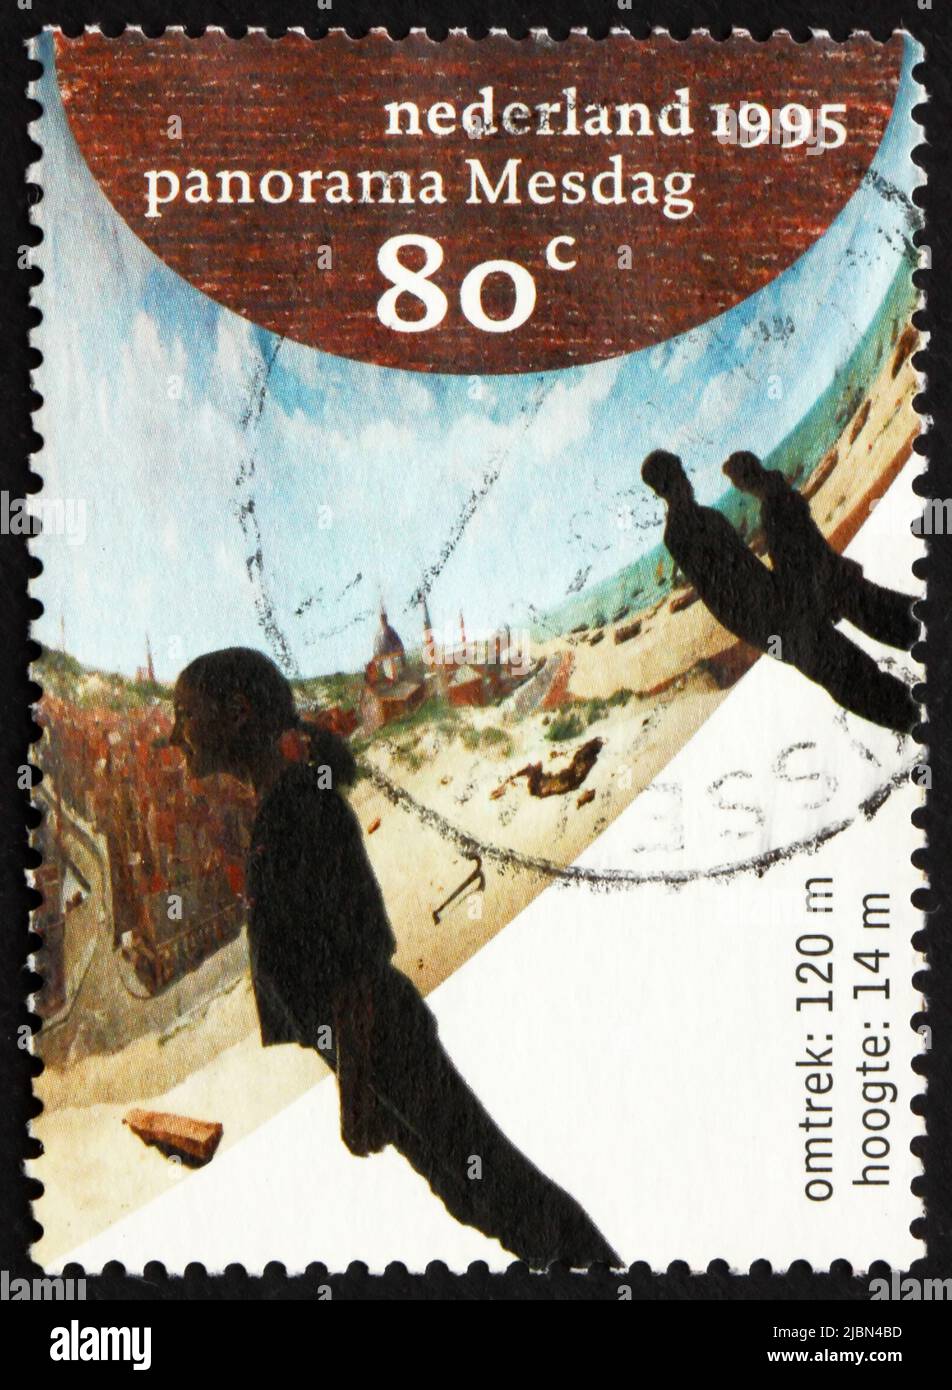 NETHERLANDS - CIRCA 1995: a stamp printed in the Netherlands shows 1994 Panorama Mesdag, by Hendrik Willem Mesdag, Mesdag Museum Restoration, circa 19 Stock Photo